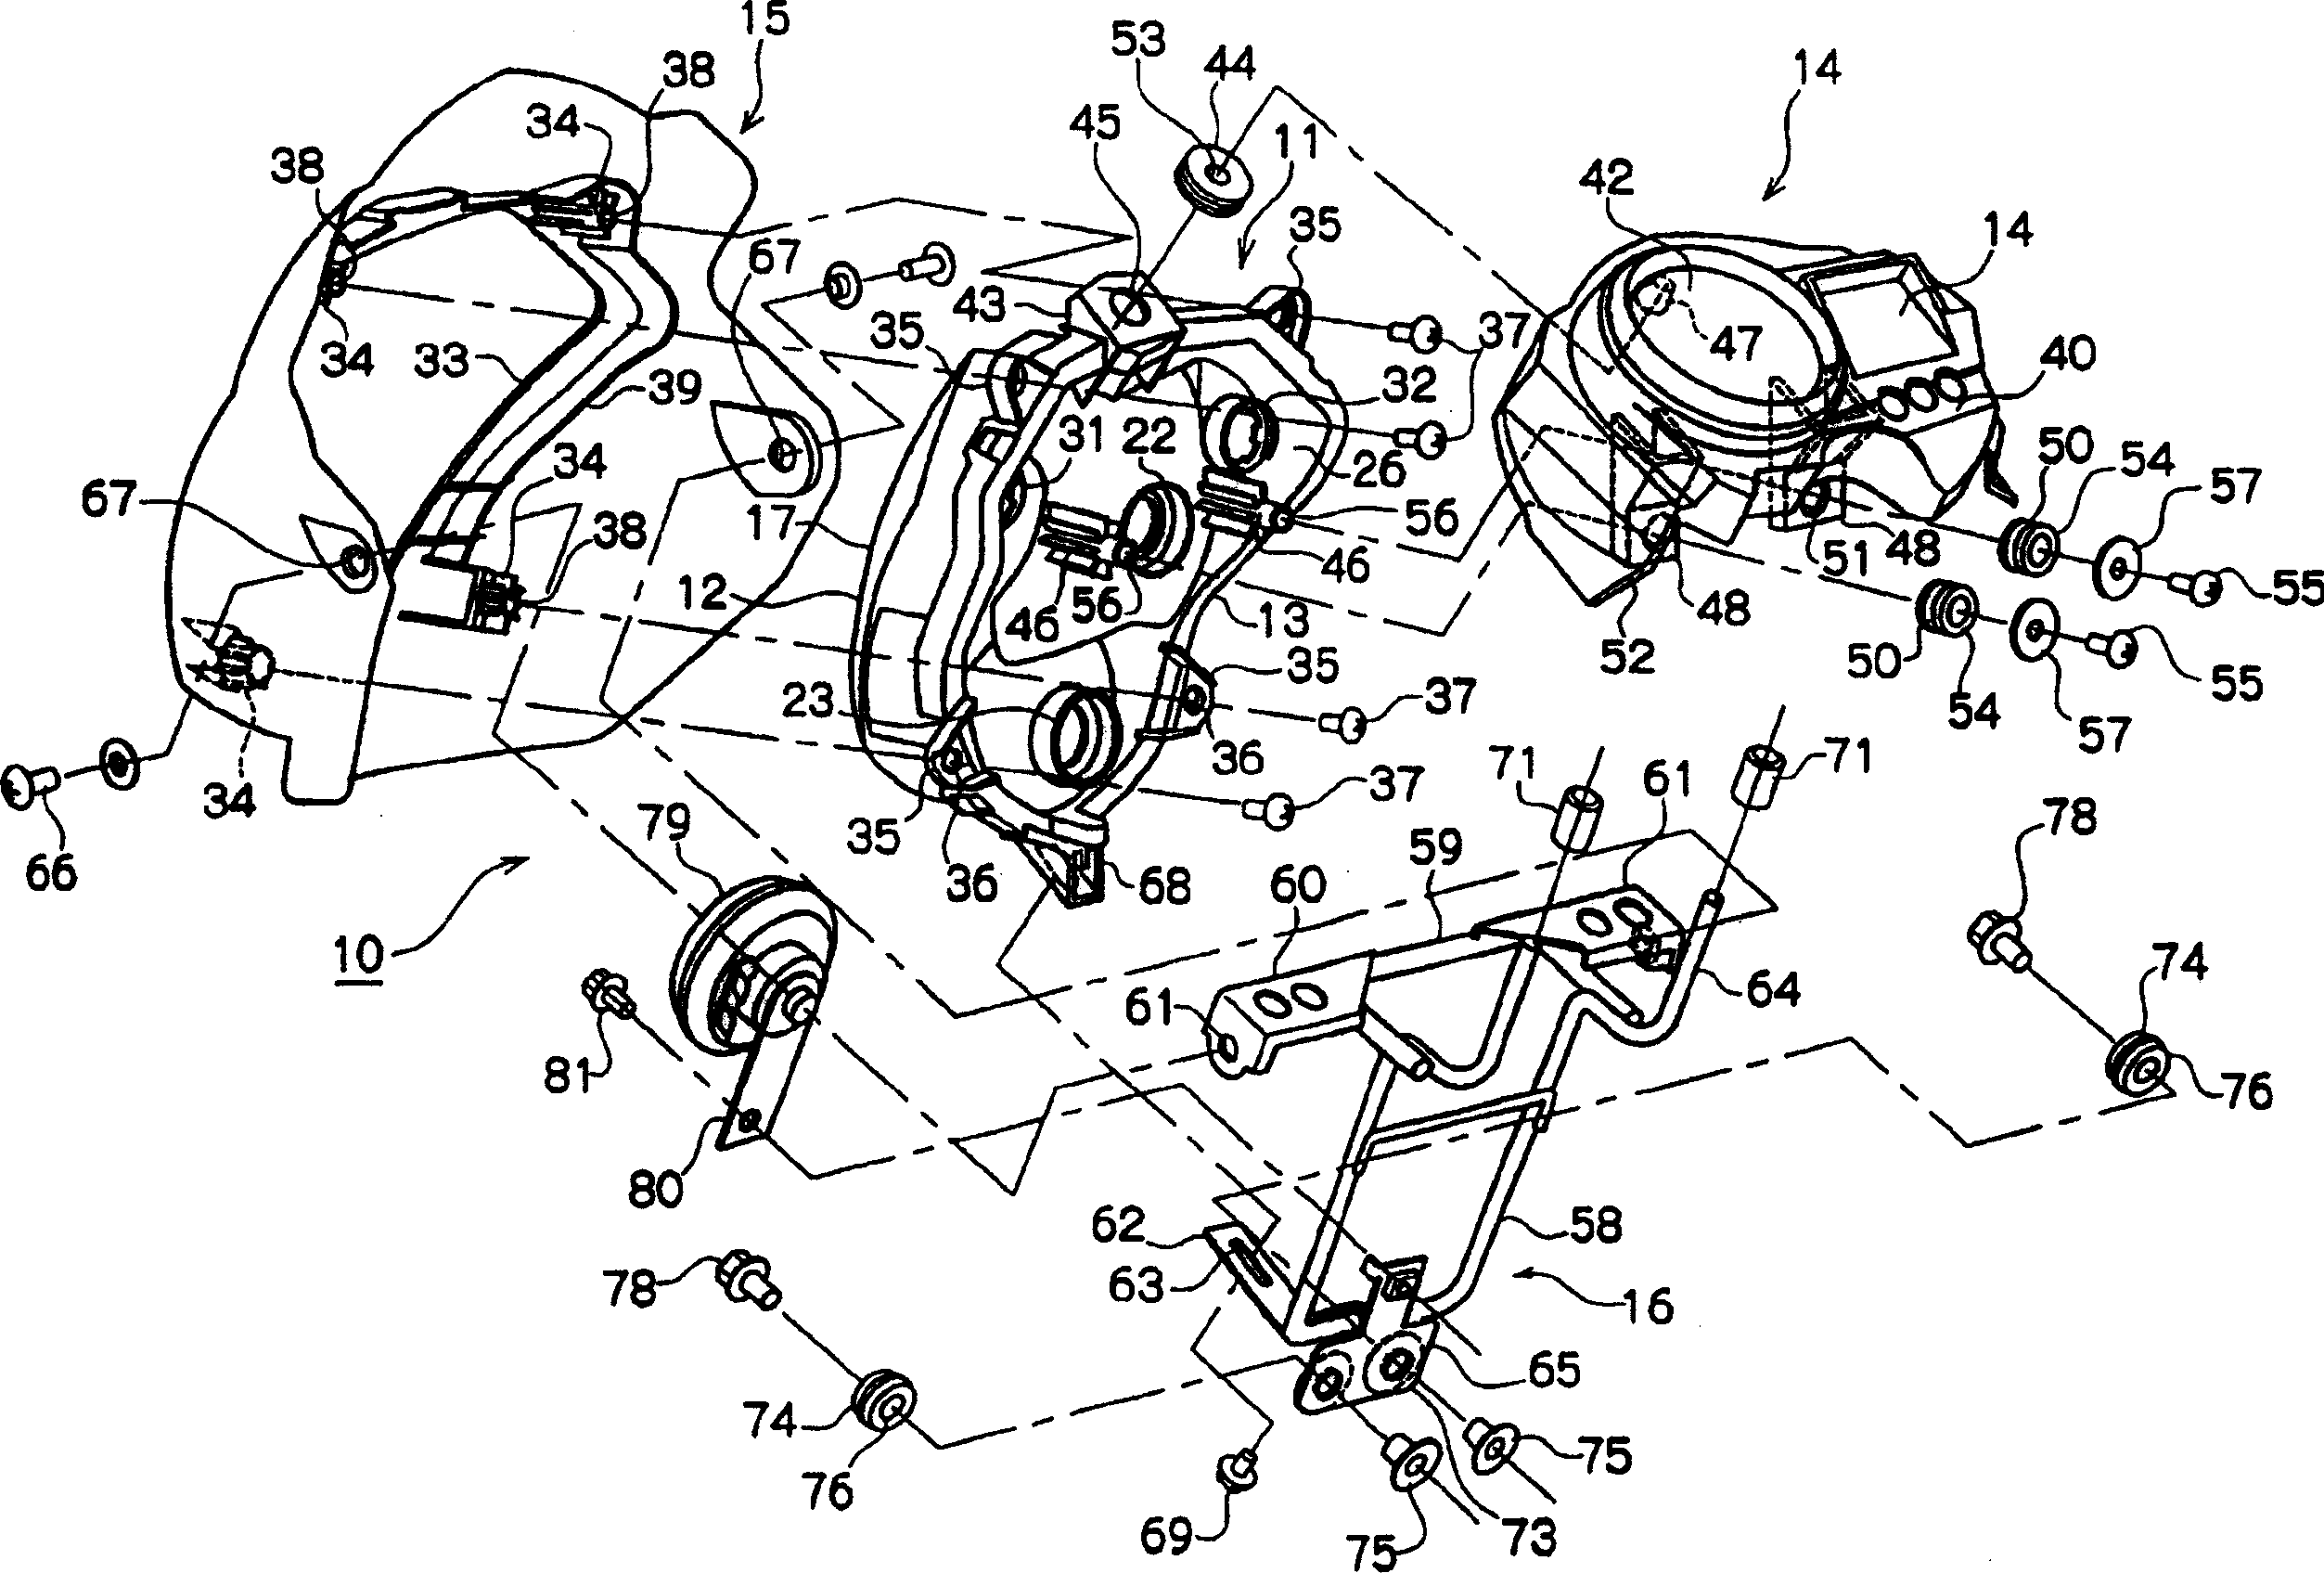 Mounting stucture of headlamp and sonsole of motor-bicycle